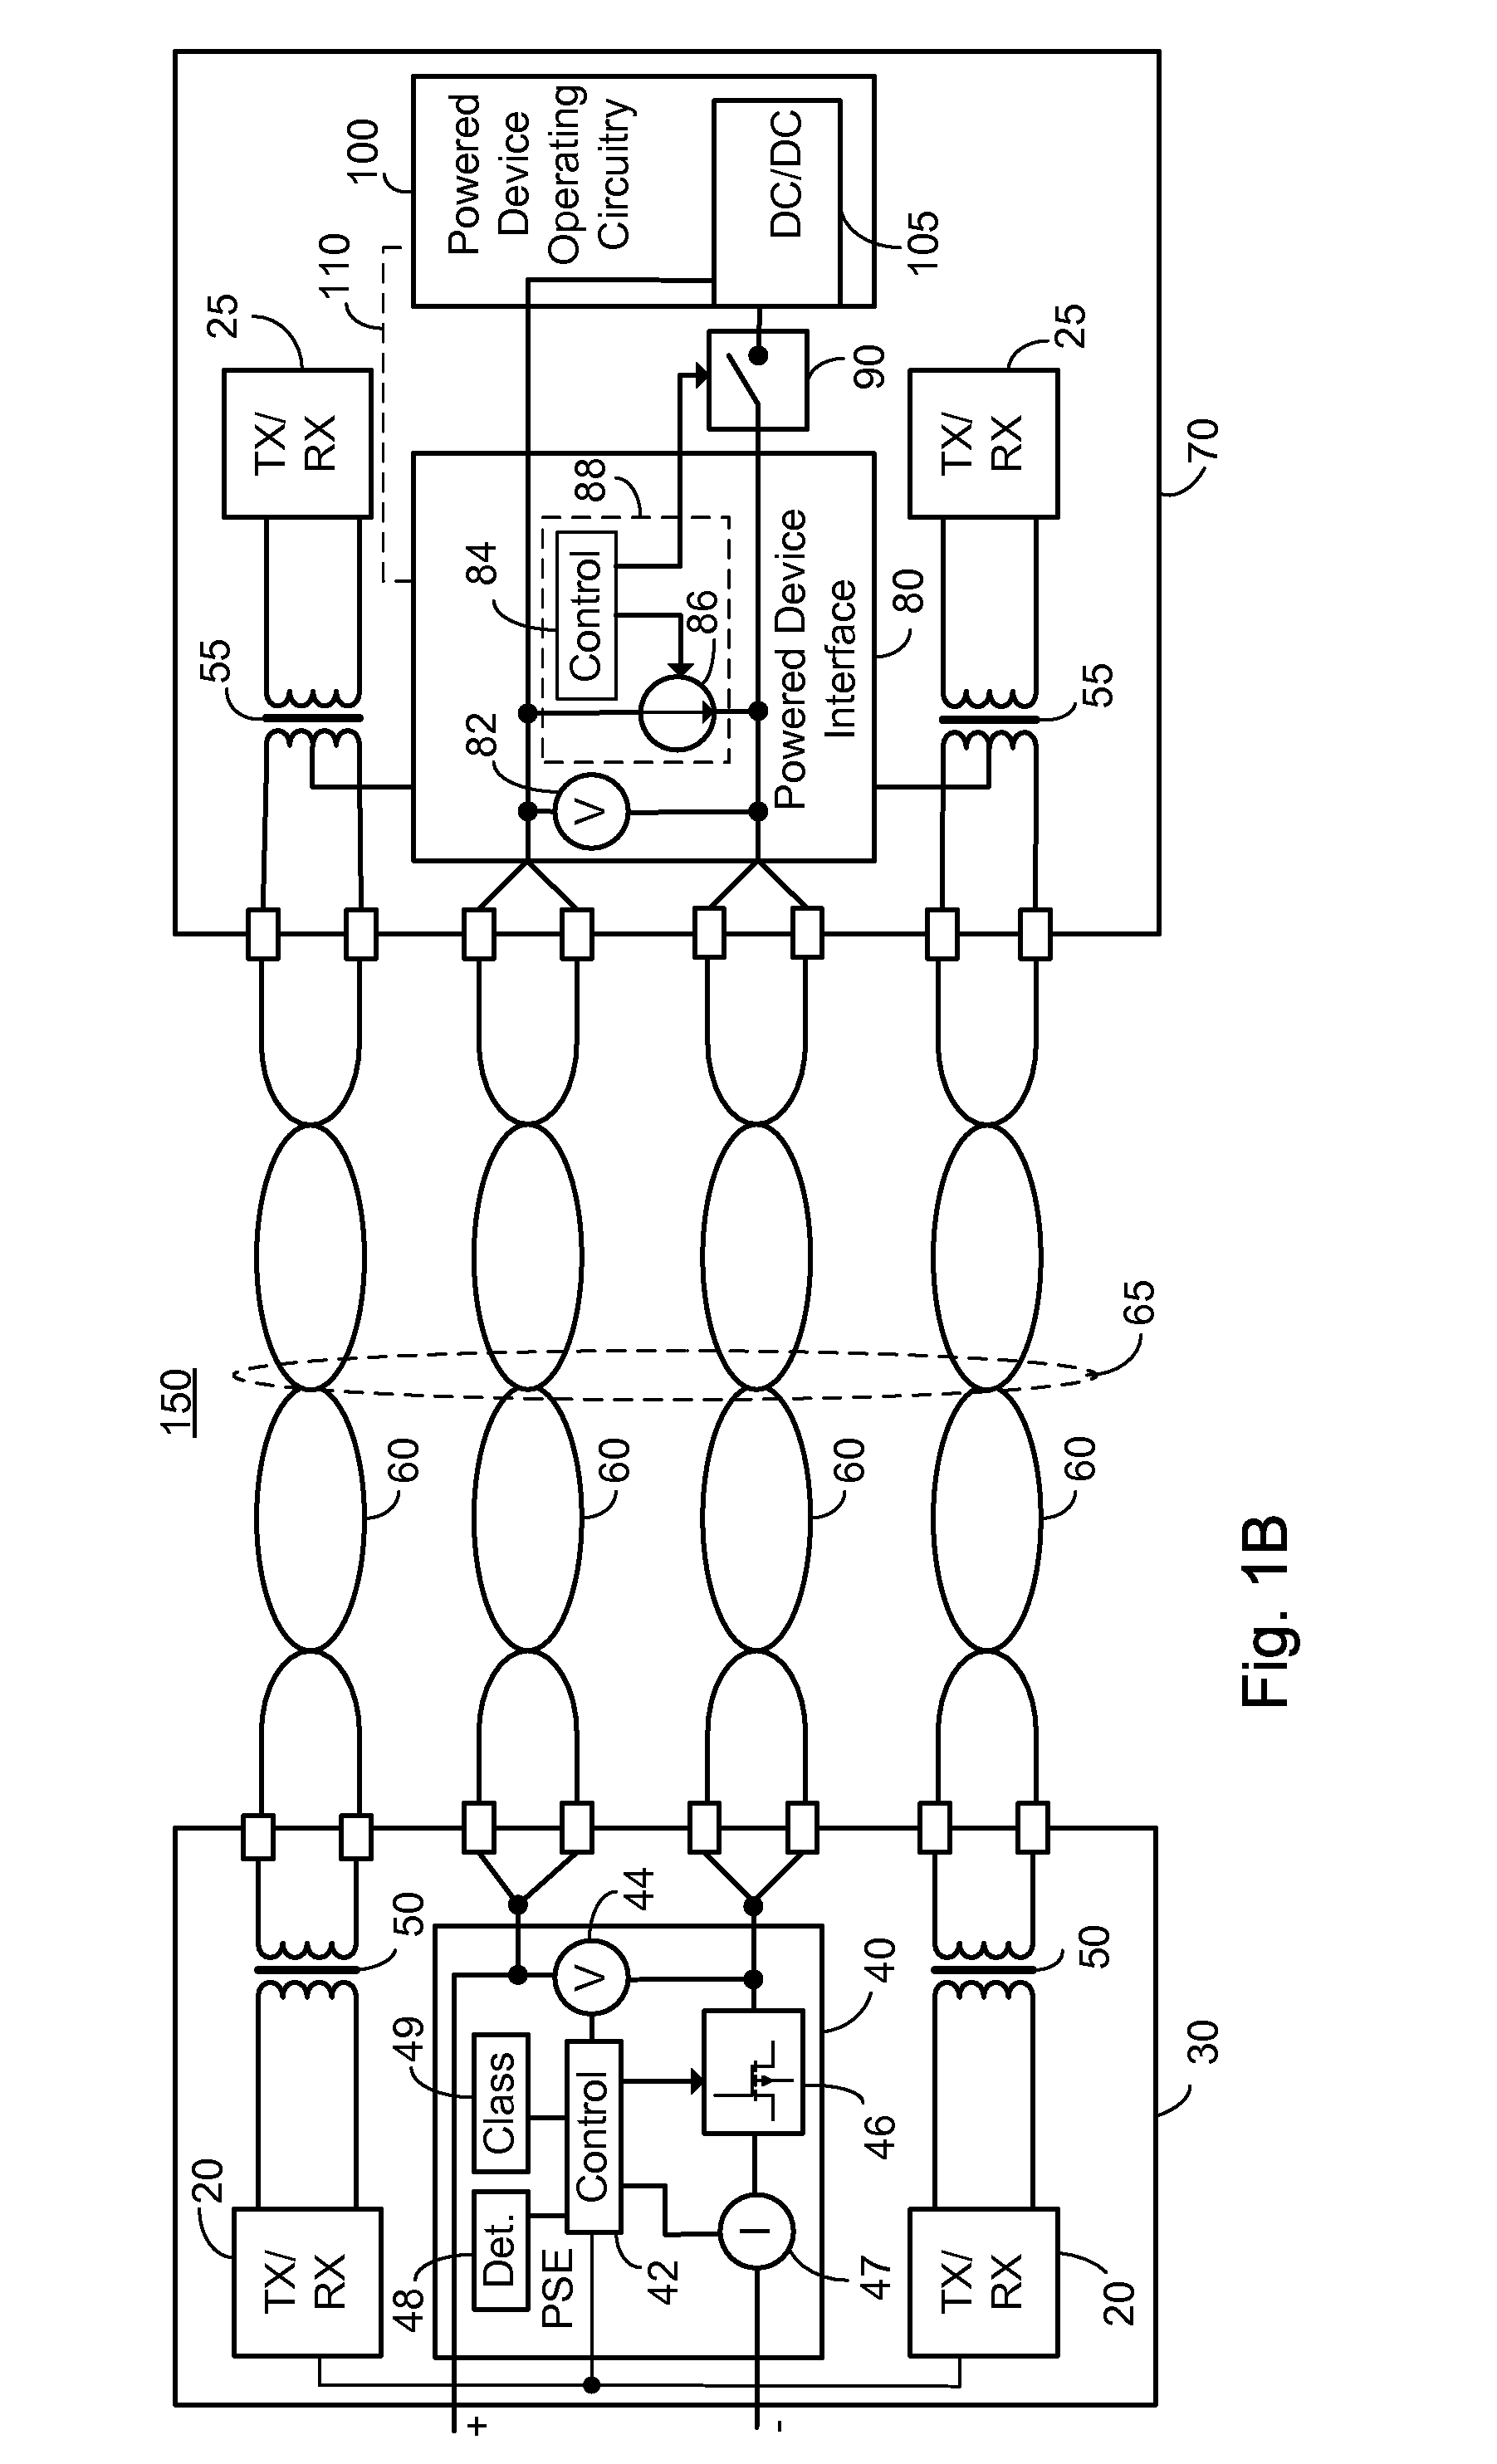 Determination of wire metric for delivery of power to a powered device over communication cabling